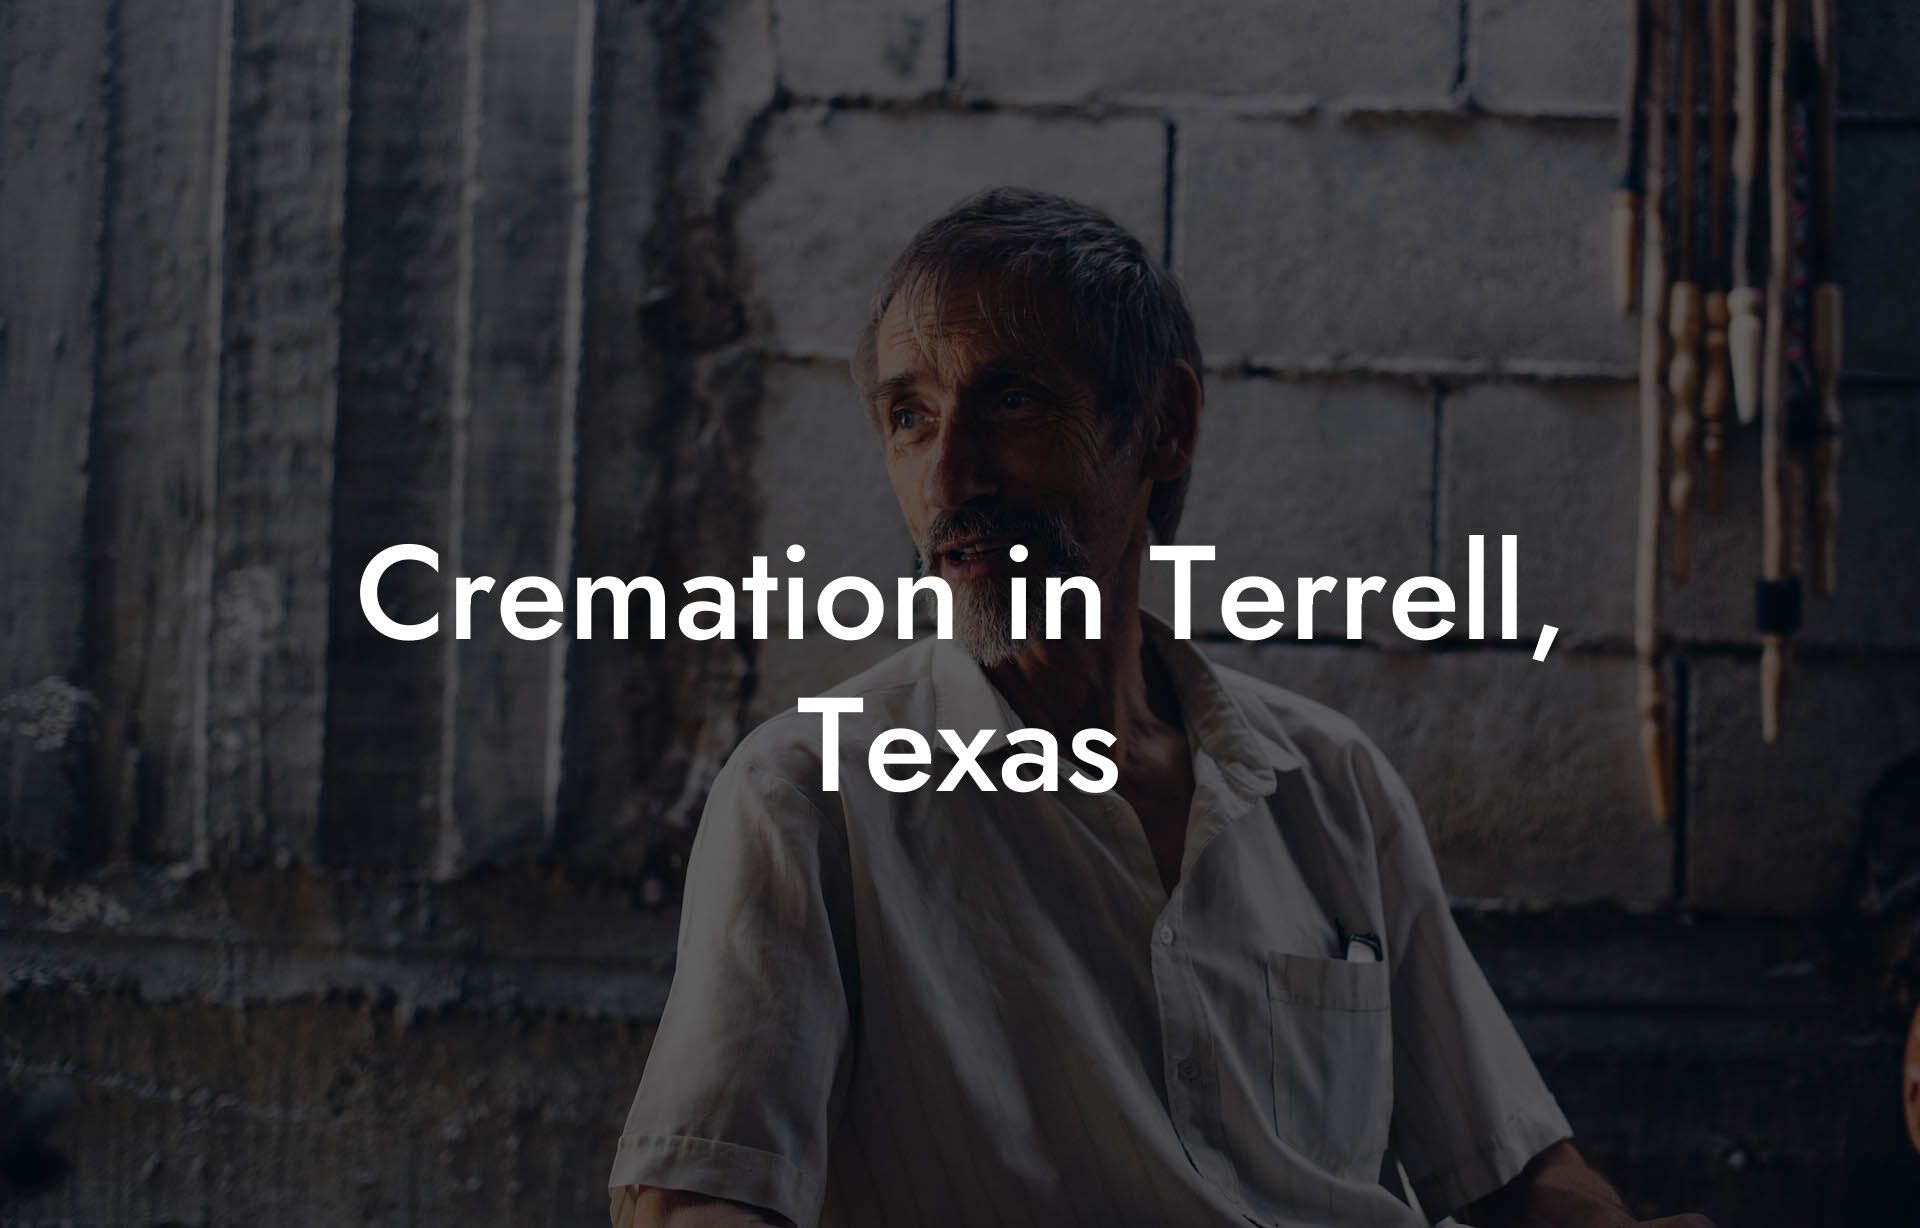 Cremation in Terrell, Texas